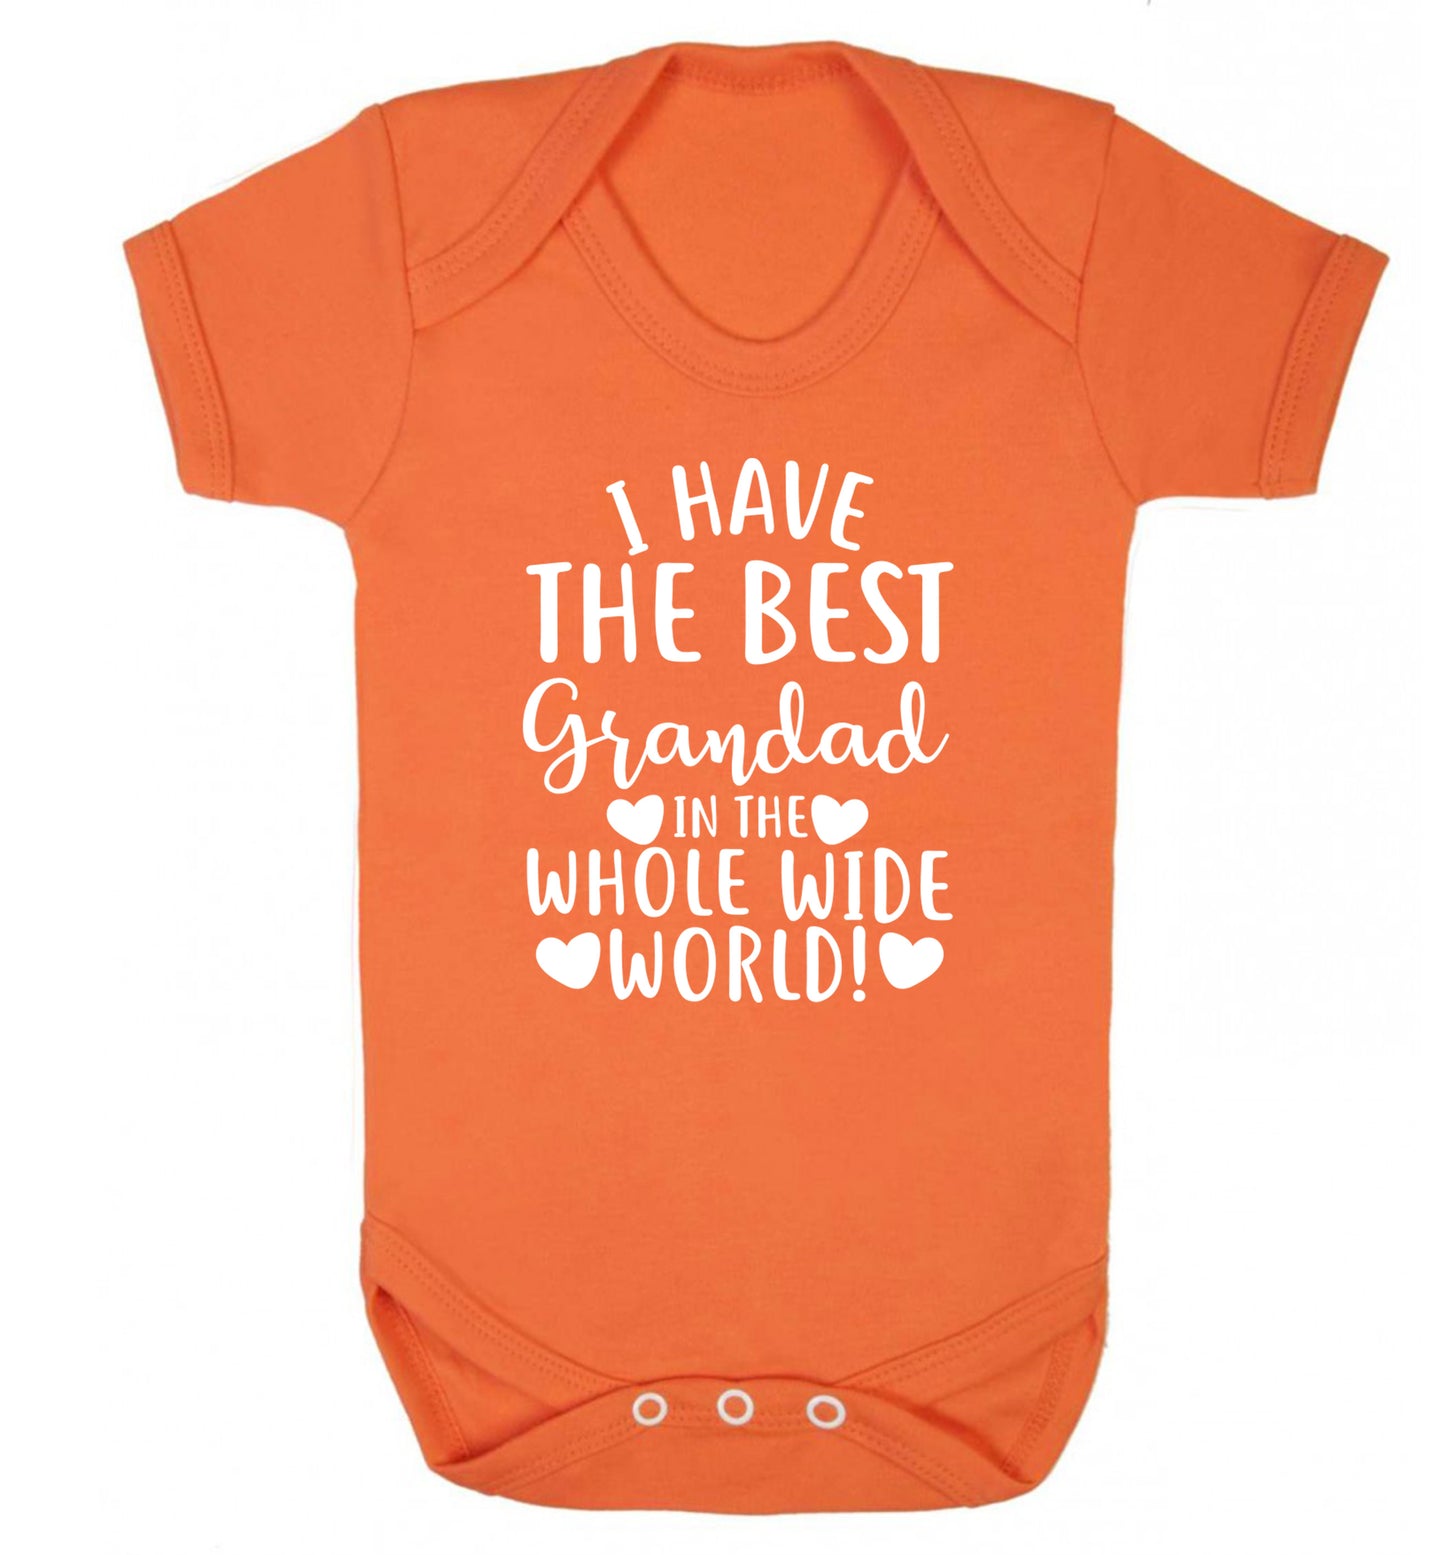 I have the best grandad in the whole wide world! Baby Vest orange 18-24 months